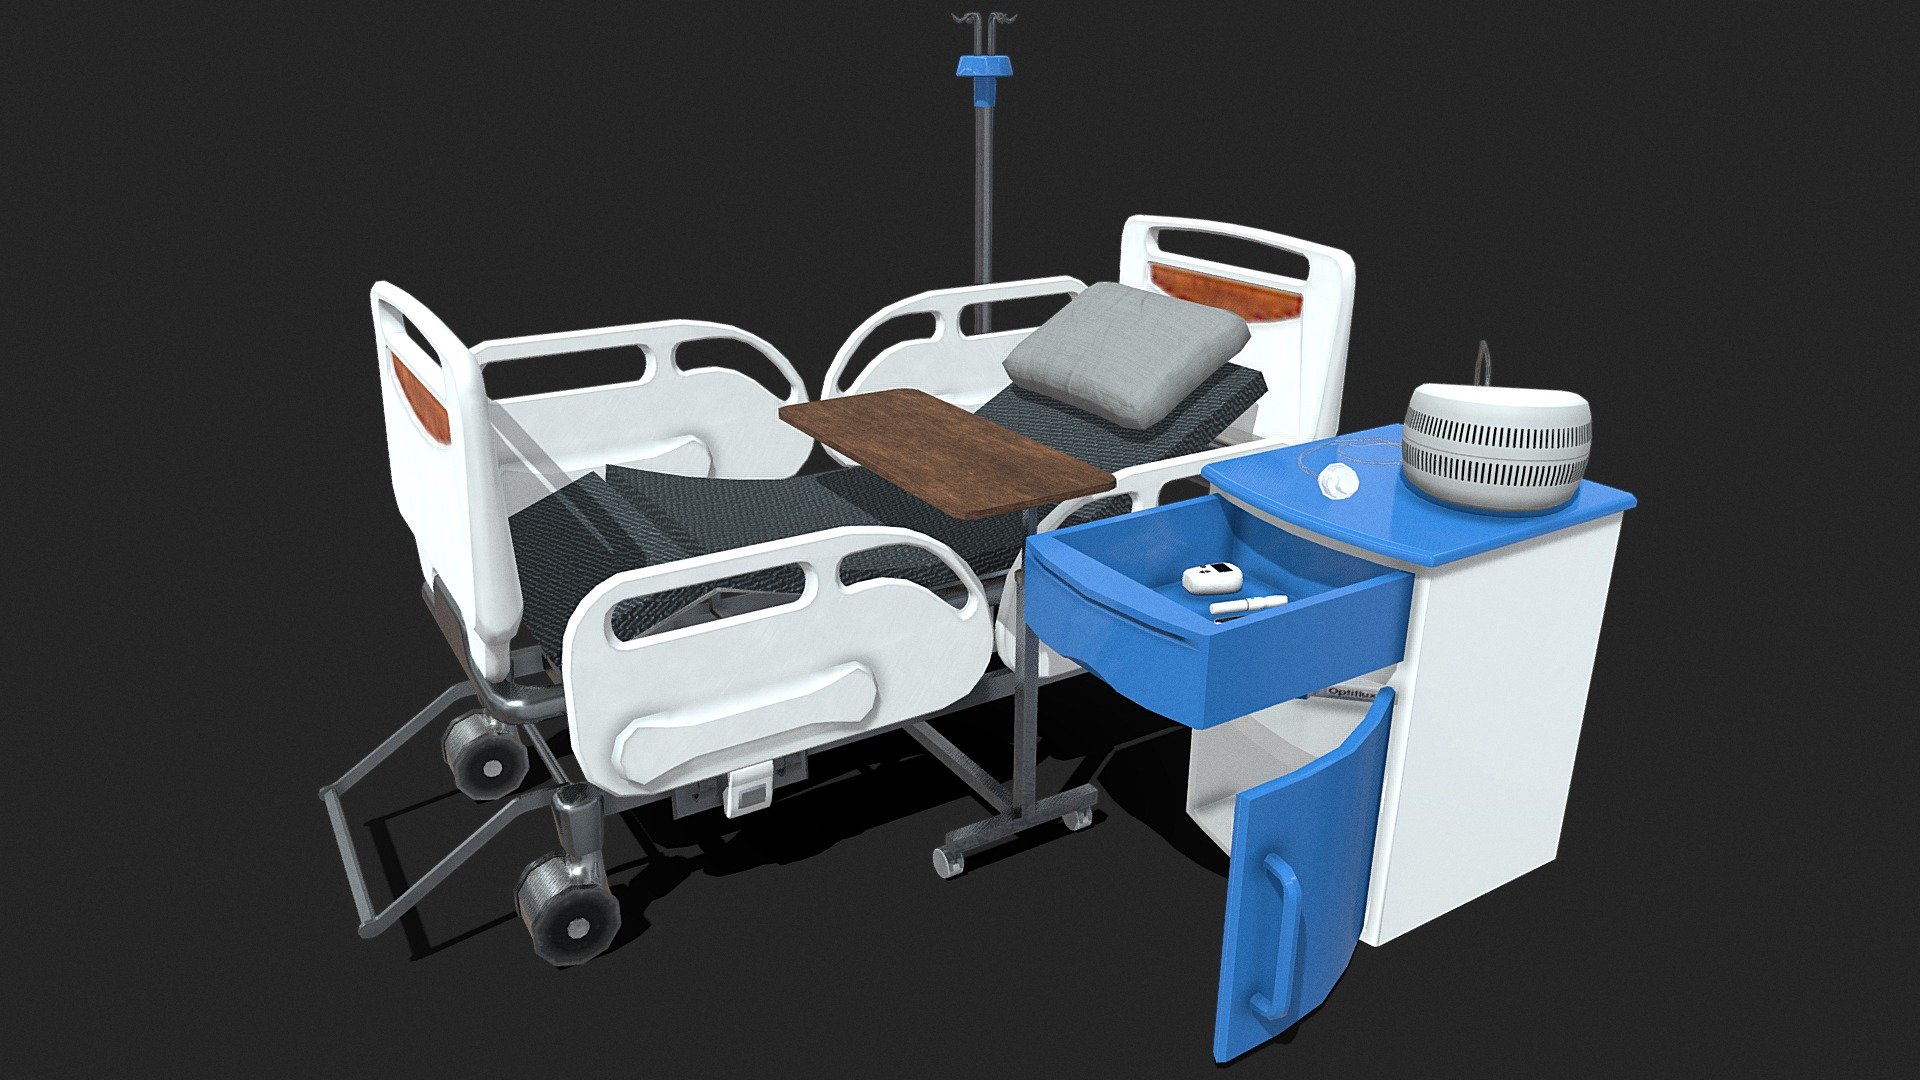 The fourth and final part of four of the Medical Supplies Collection 2 series.

First Part: https://sketchfab.com/3d-models/medical-supplies-collection-2-1-faa68412fb2749ffb525b82928b8991c Second Part: https://sketchfab.com/3d-models/medical-supplies-collection-2-2-a31e92b98af9458681276eff526f0cc8 Third Part: https://sketchfab.com/3d-models/medical-supplies-collection-2-3-d62dae40c6d54cd19a00bfbdff4d4b80

This fourth part comes with:

Dialyser
Table
Drawer
Halogen Penlight
2 Glucose Monitors
Glucose Pen
Holder
Hospital Bed (in parts but upwards)
Nebuliser - Medical Supplies Collection 2 #4 - Buy Royalty Free 3D model by Miguel Adão (@theauditor) 3d model